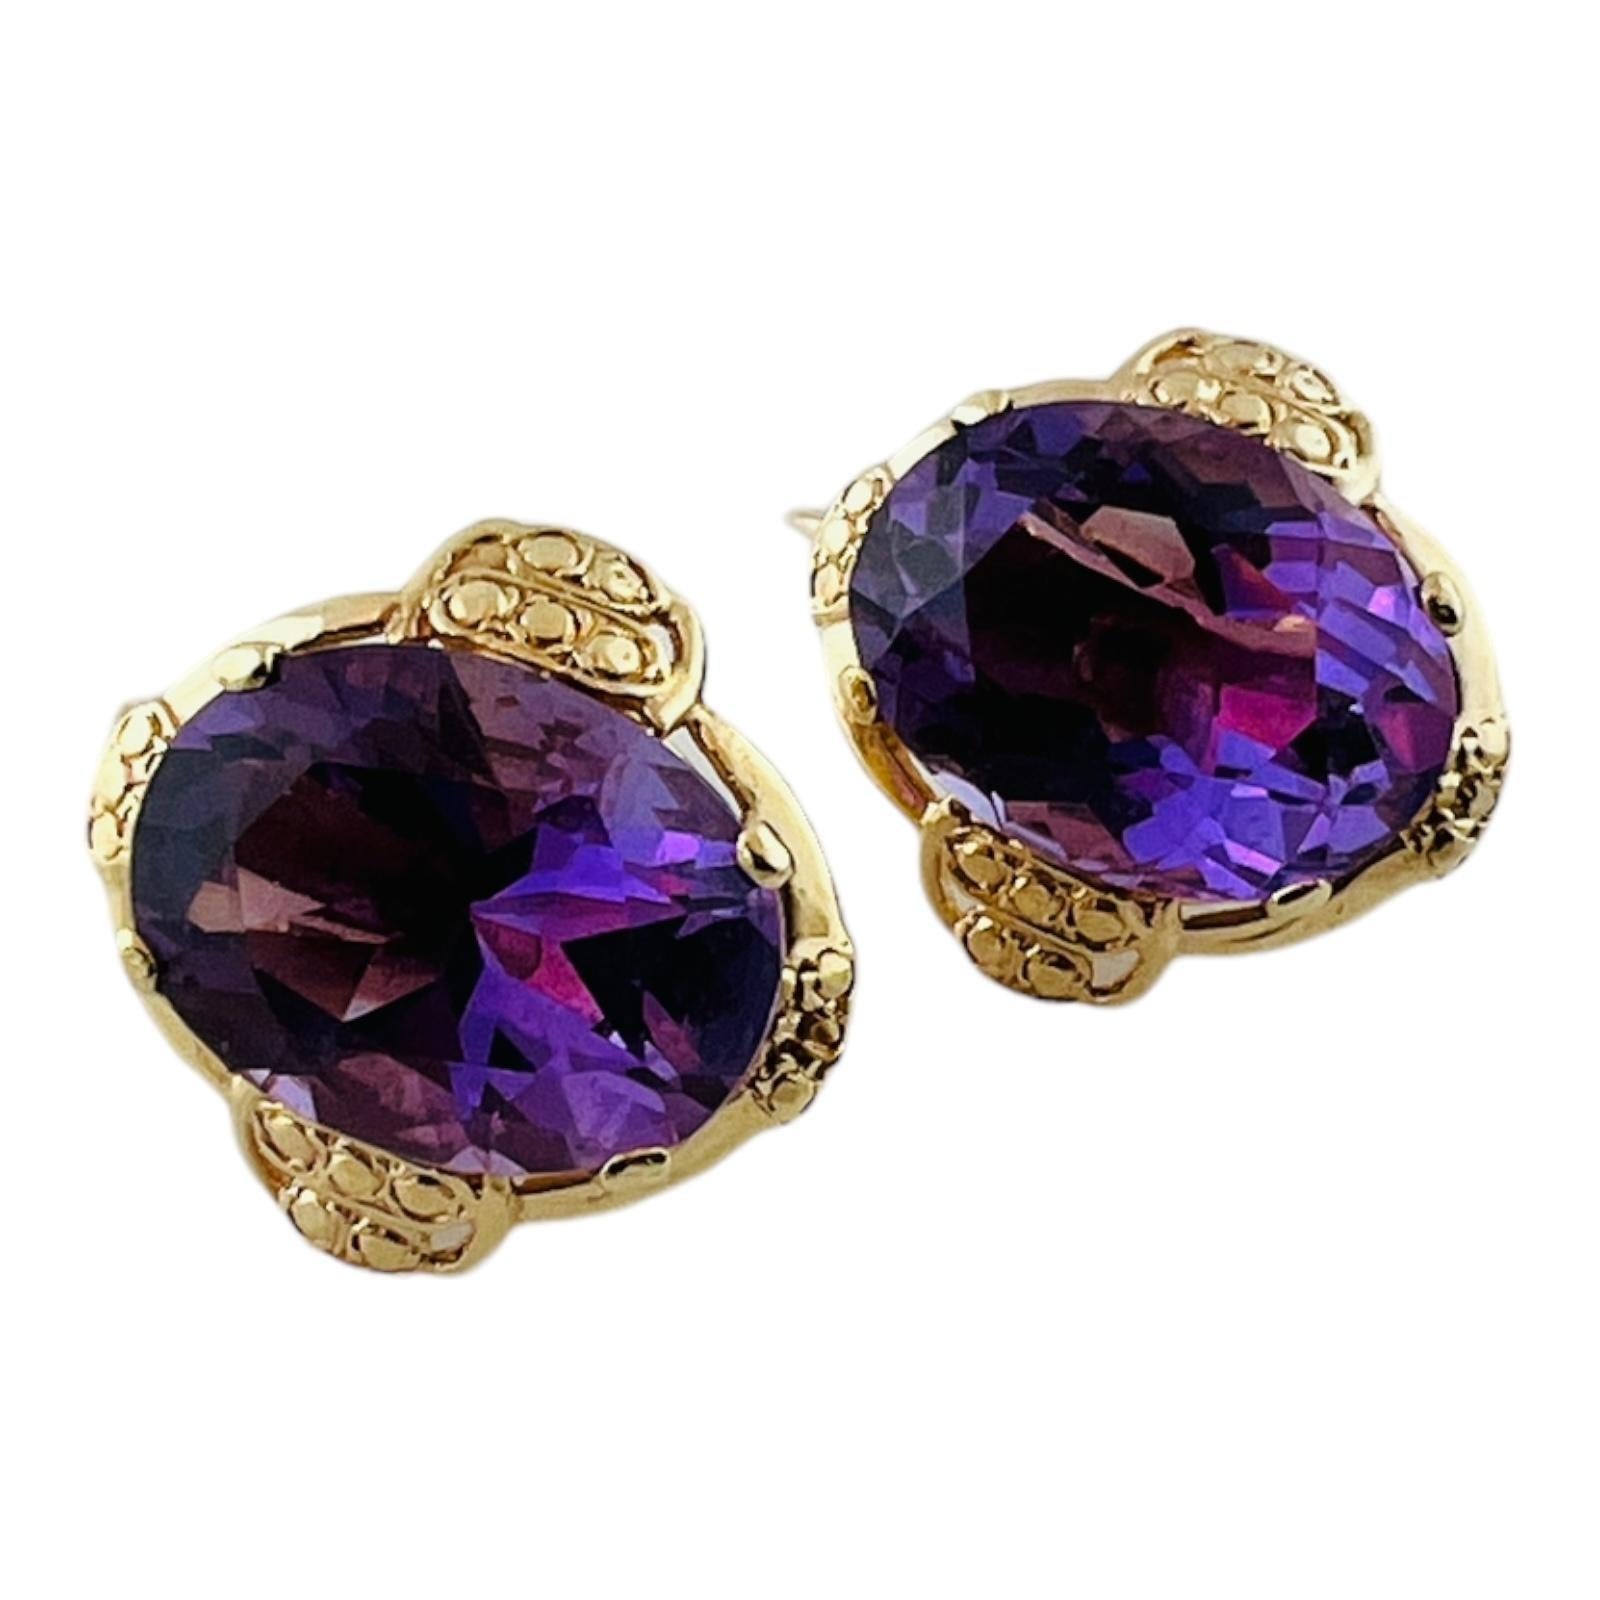 14K Yellow Gold Oval Amethyst Ornate Earrings #16482 In Good Condition For Sale In Washington Depot, CT